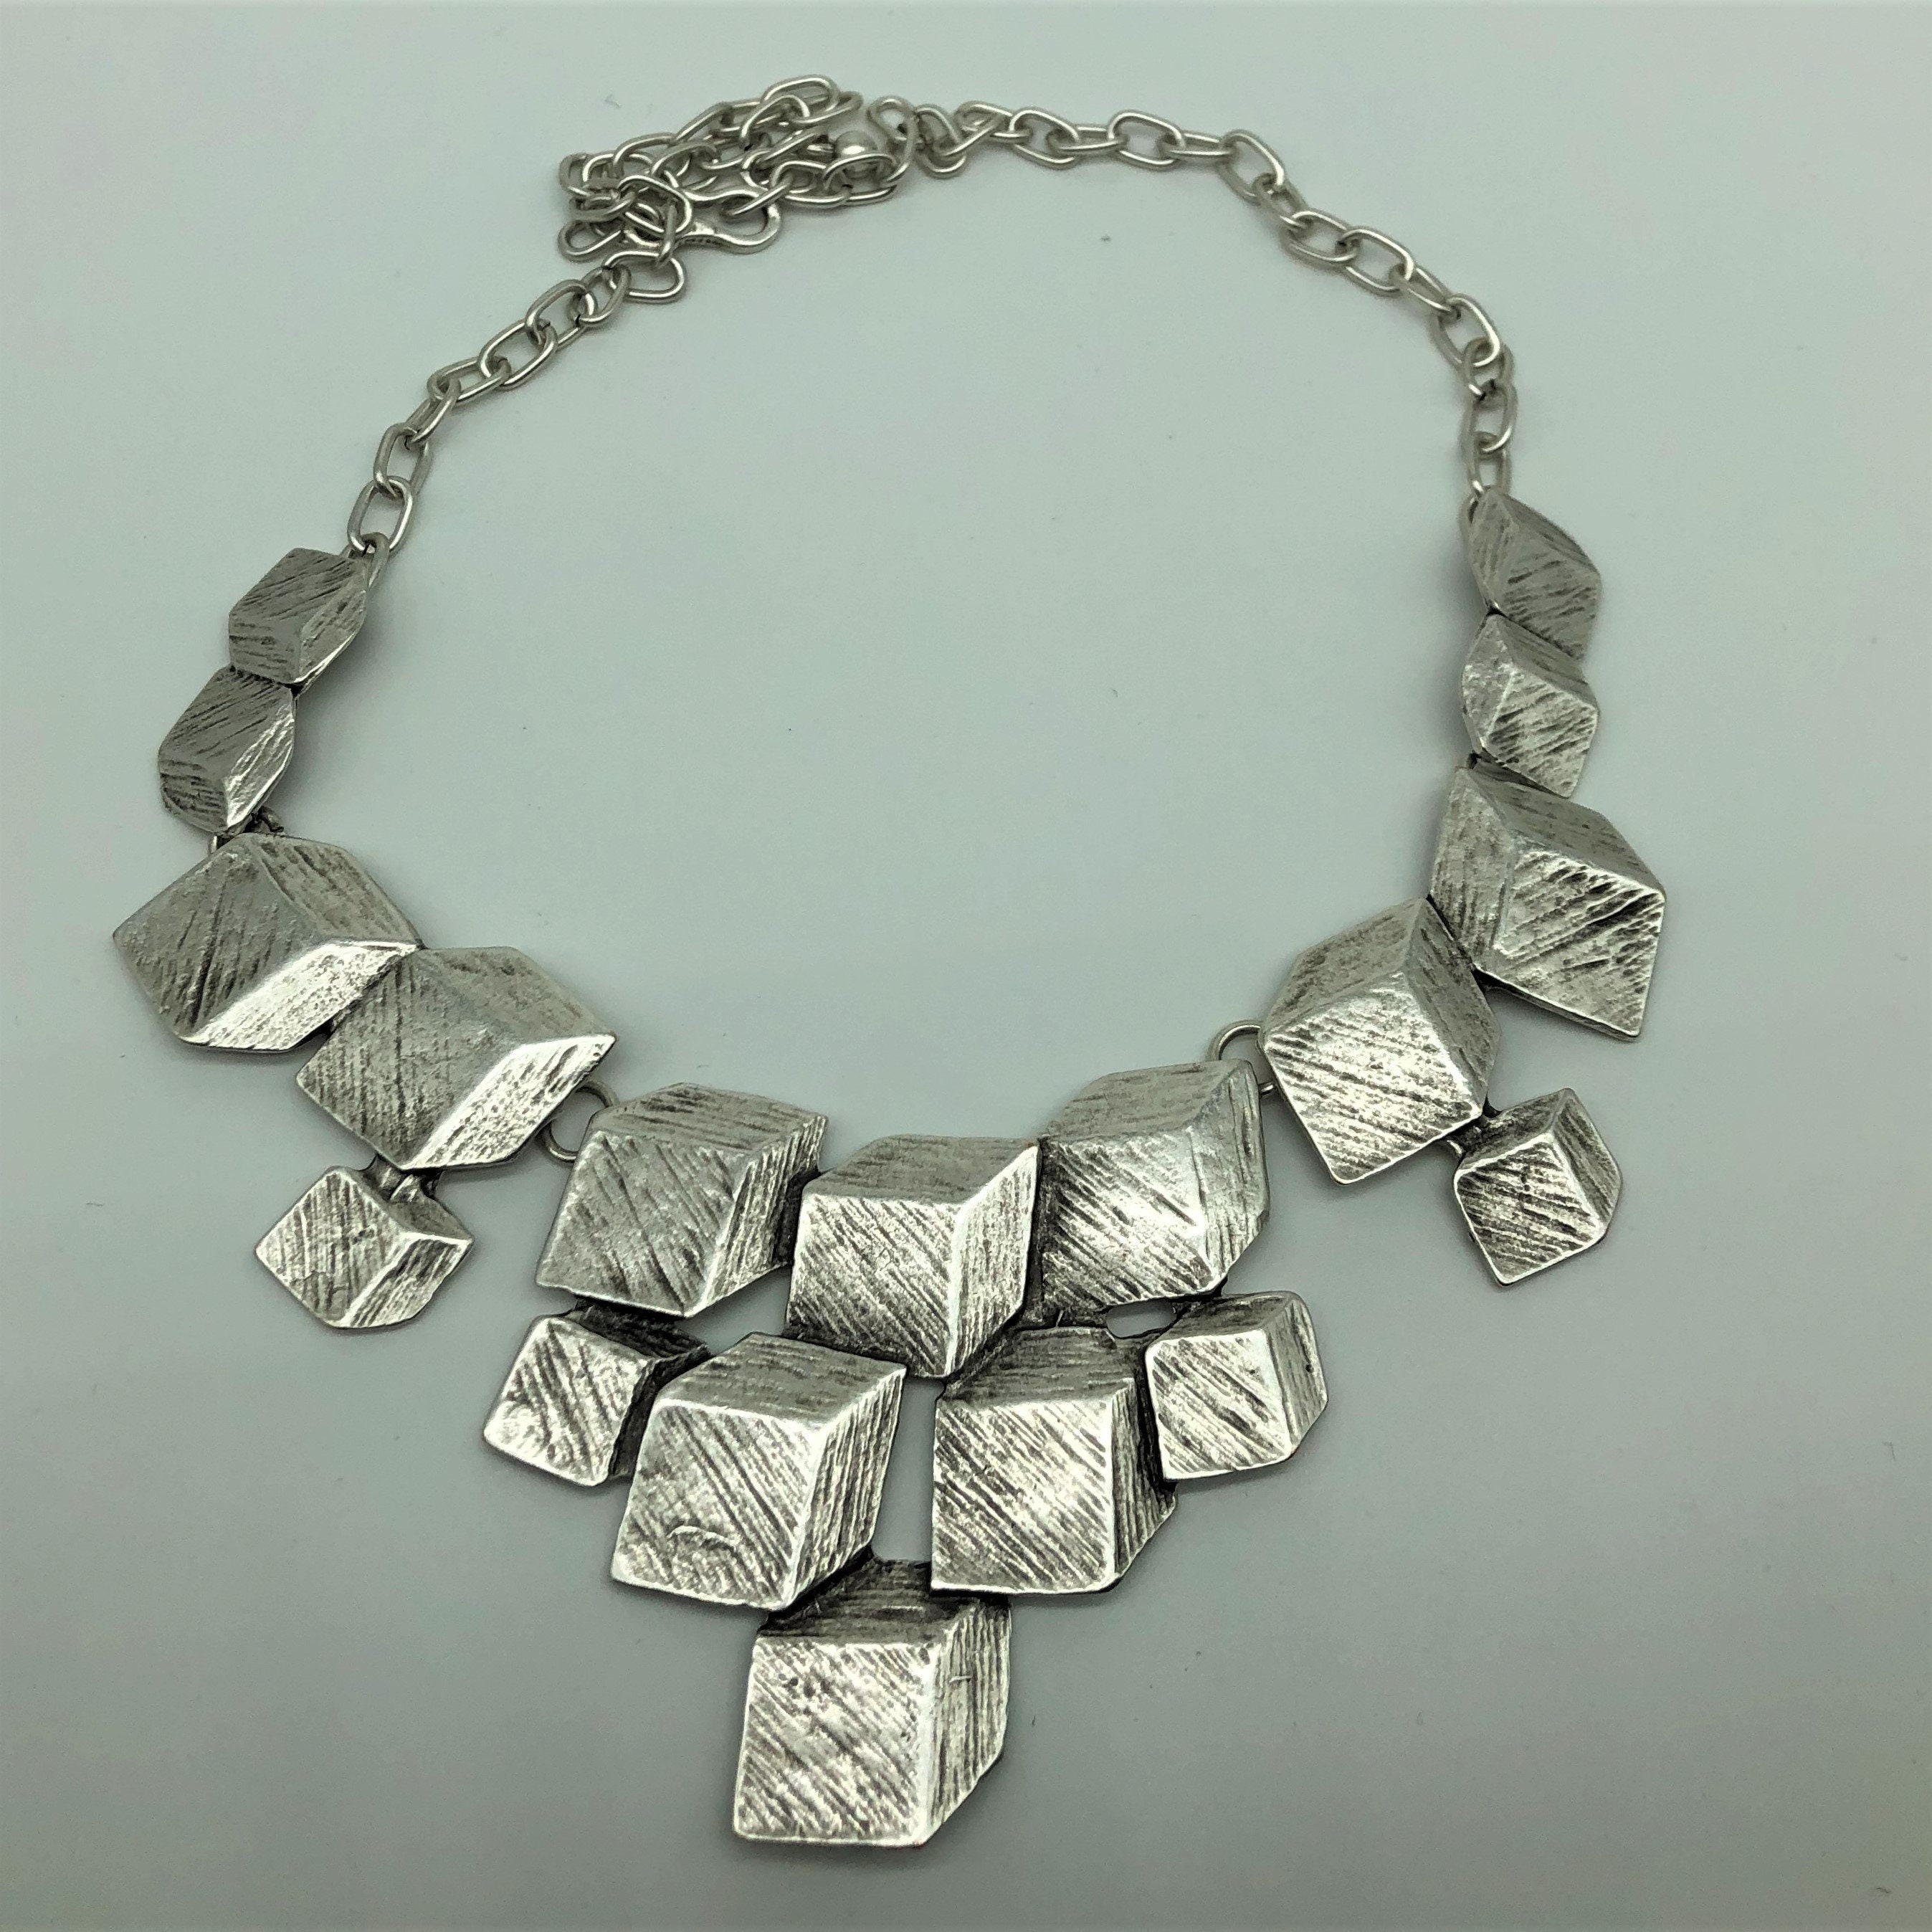 Handmade Silver and Zinc 3D Cubes Statement Necklace Ethnic Jewellery ...